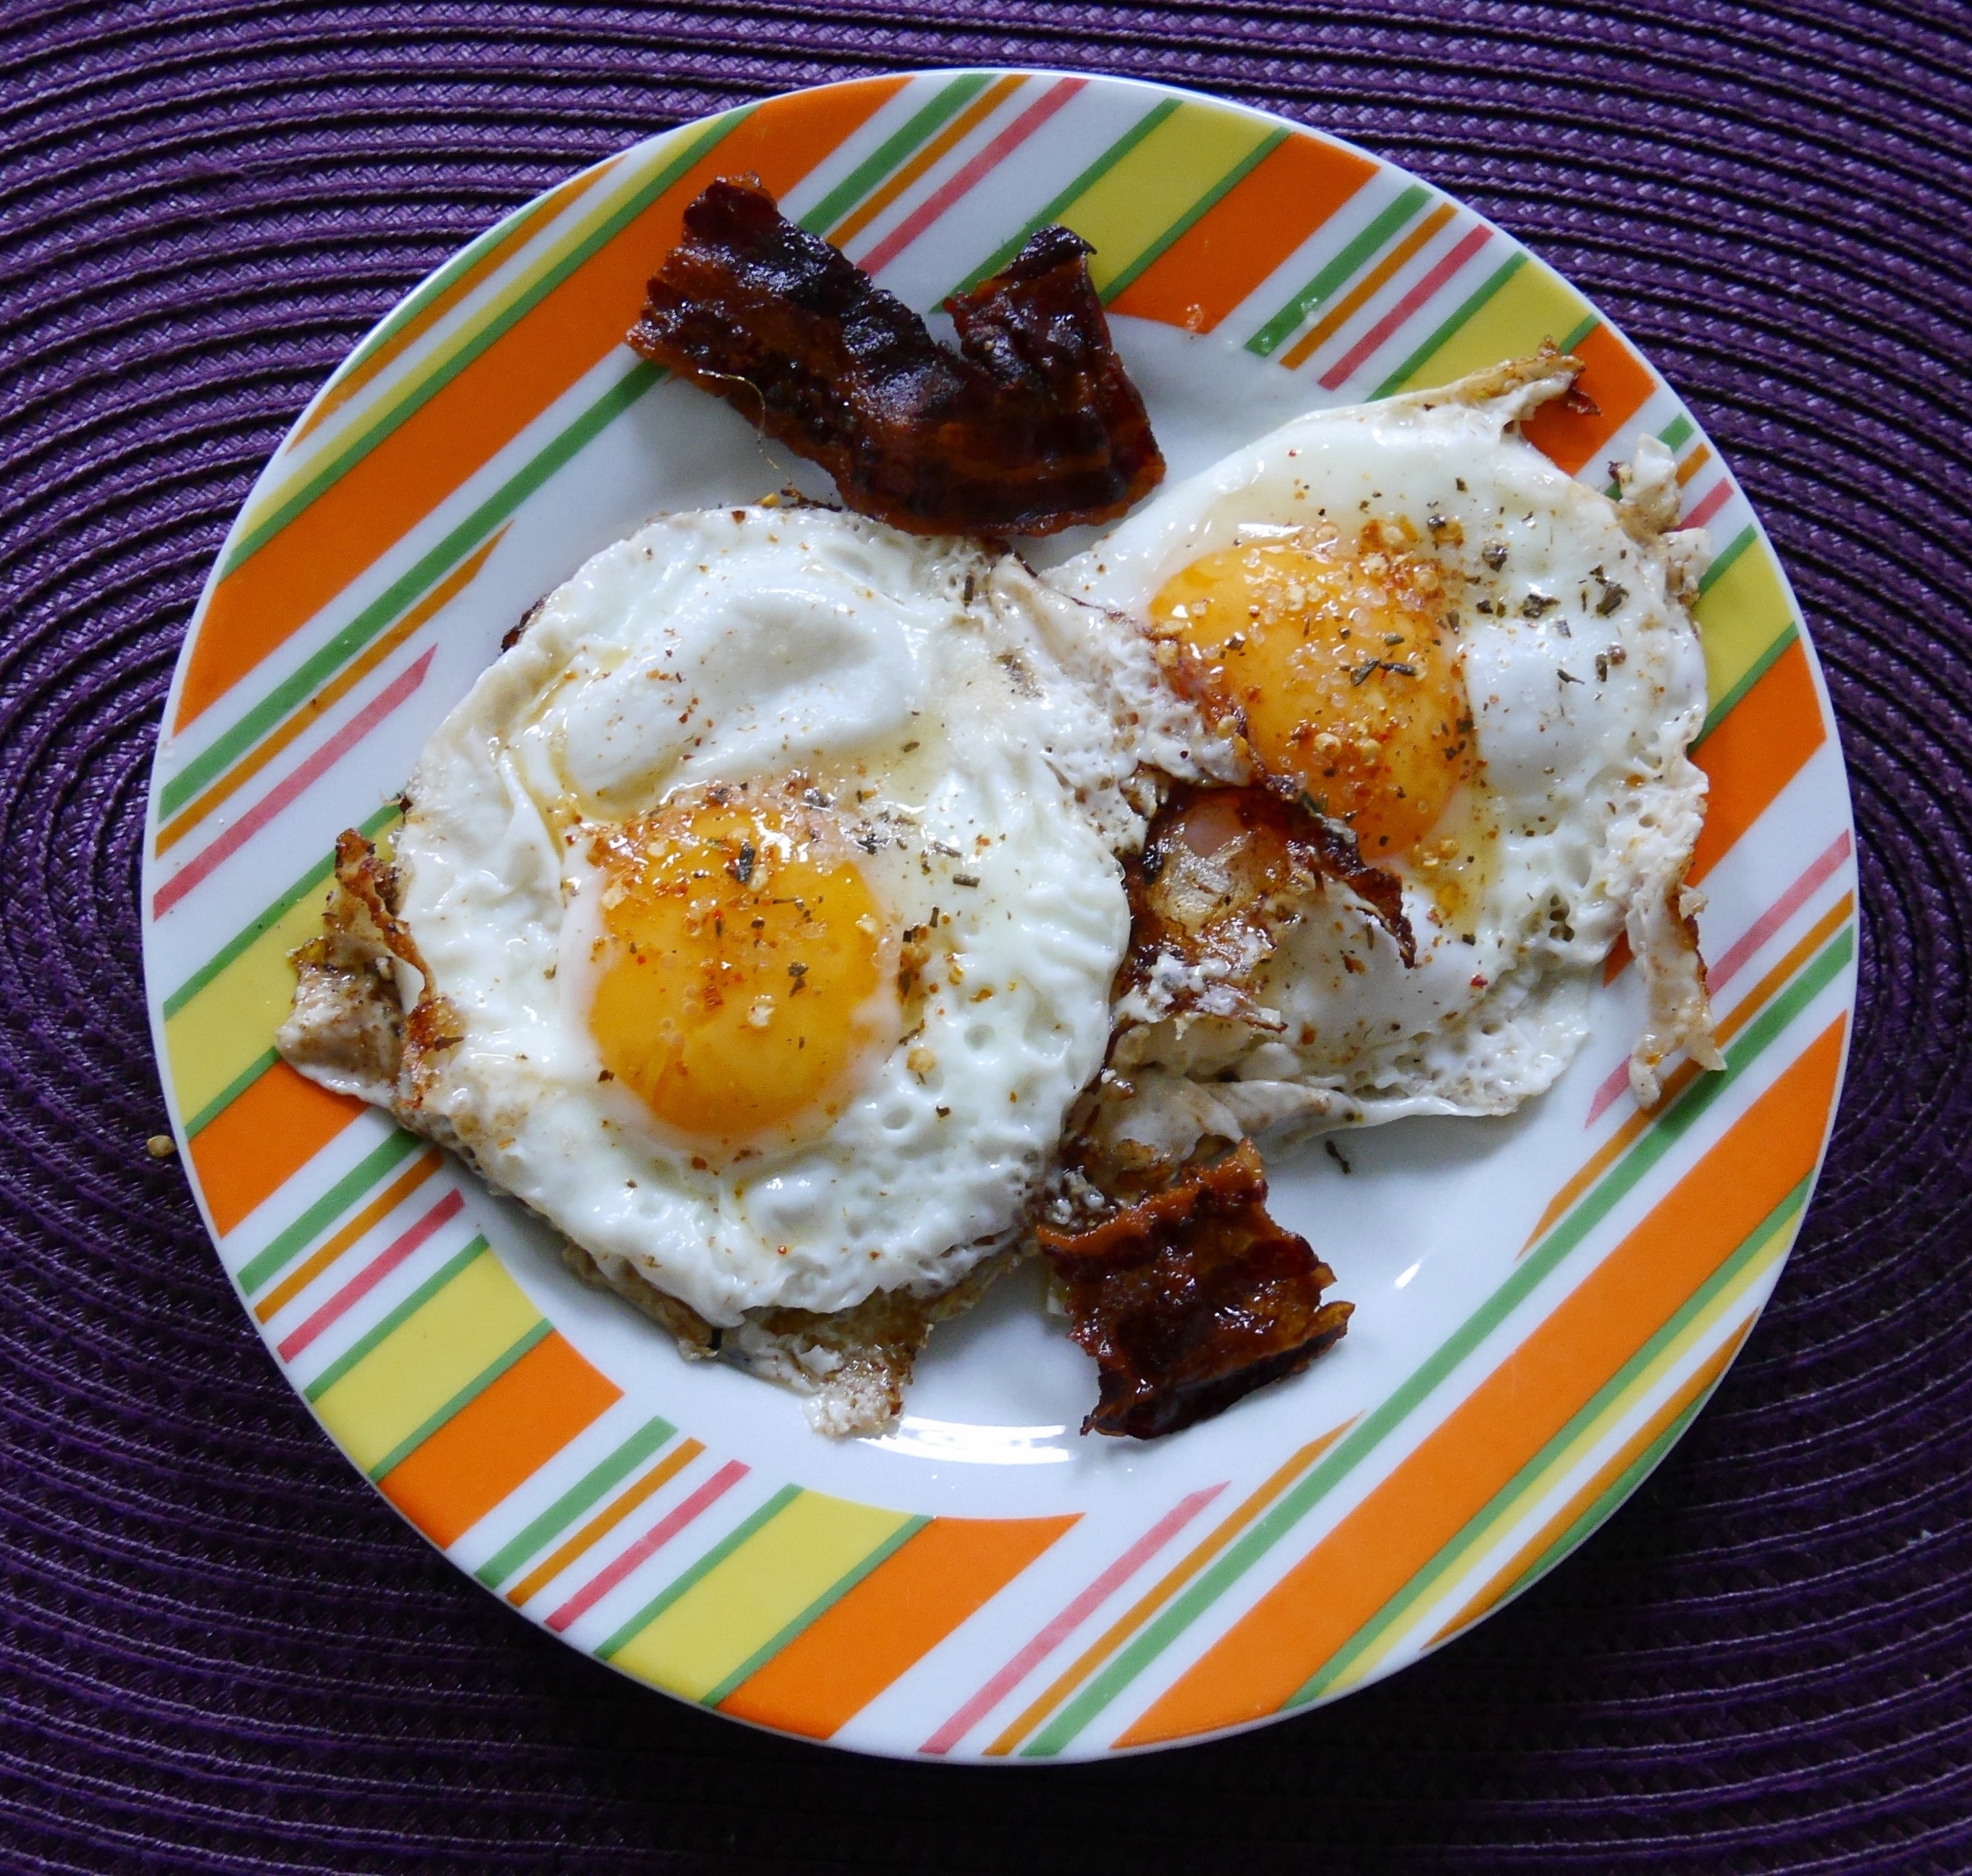 sunny sideup egg and fried bacon